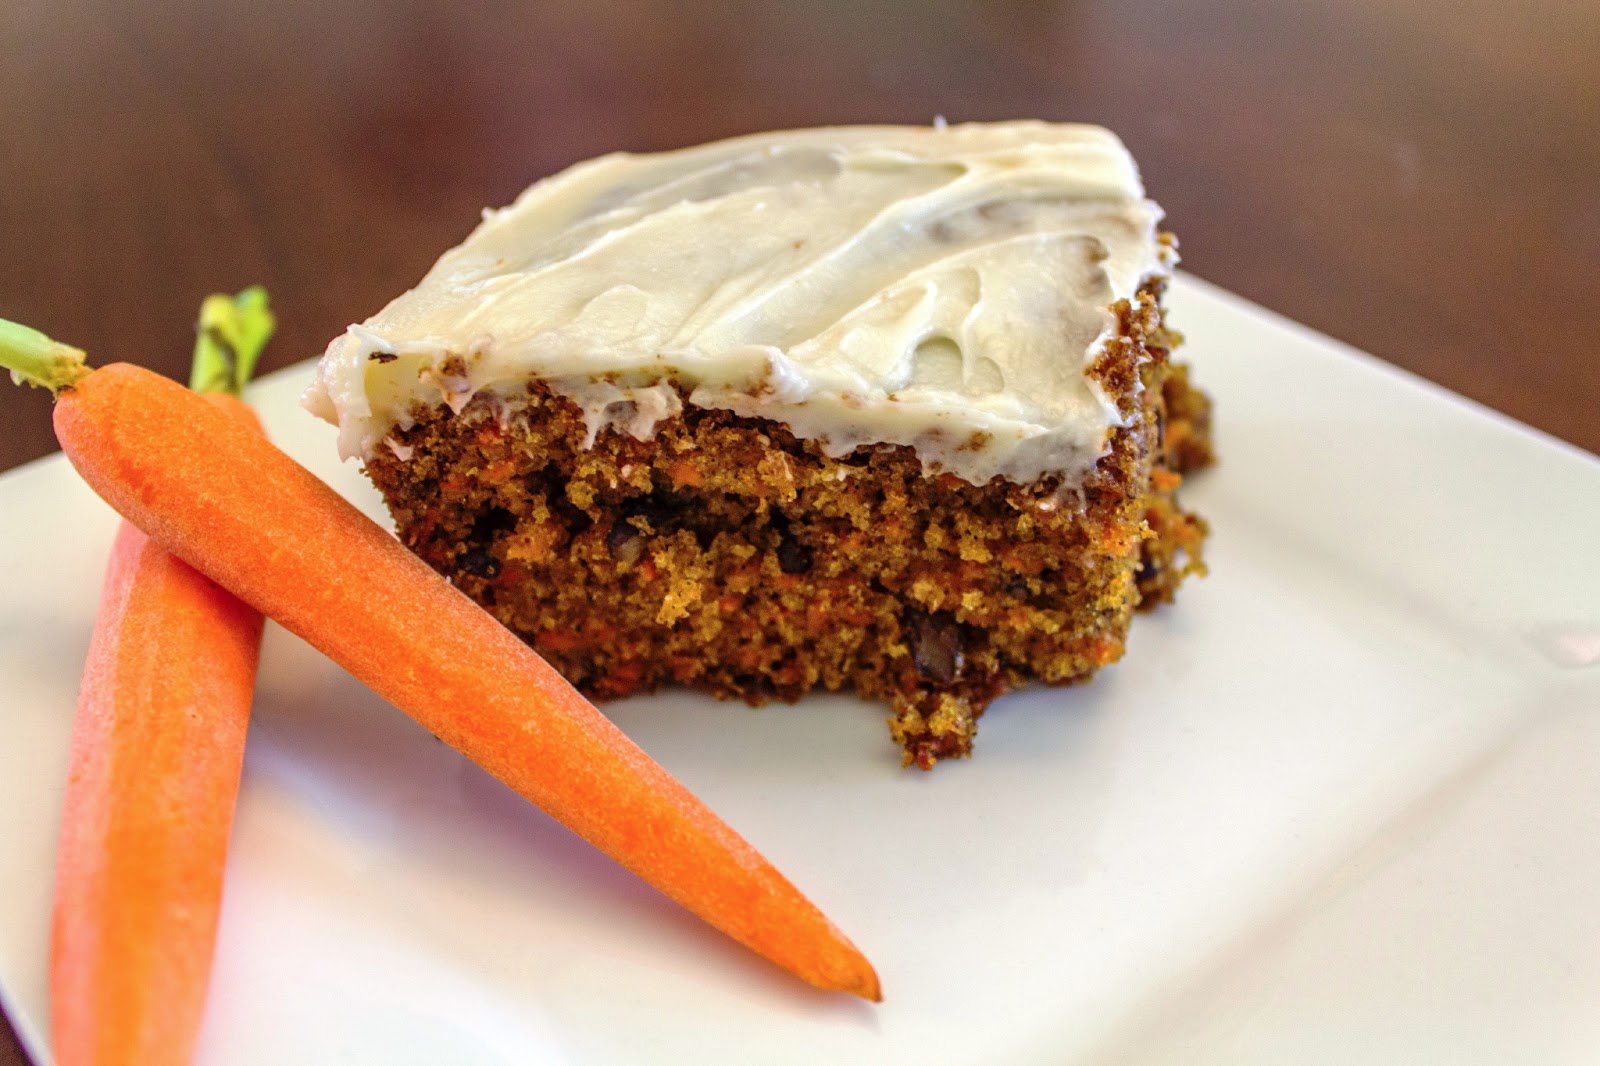 This recipe was a standard carrot cake recipe. 